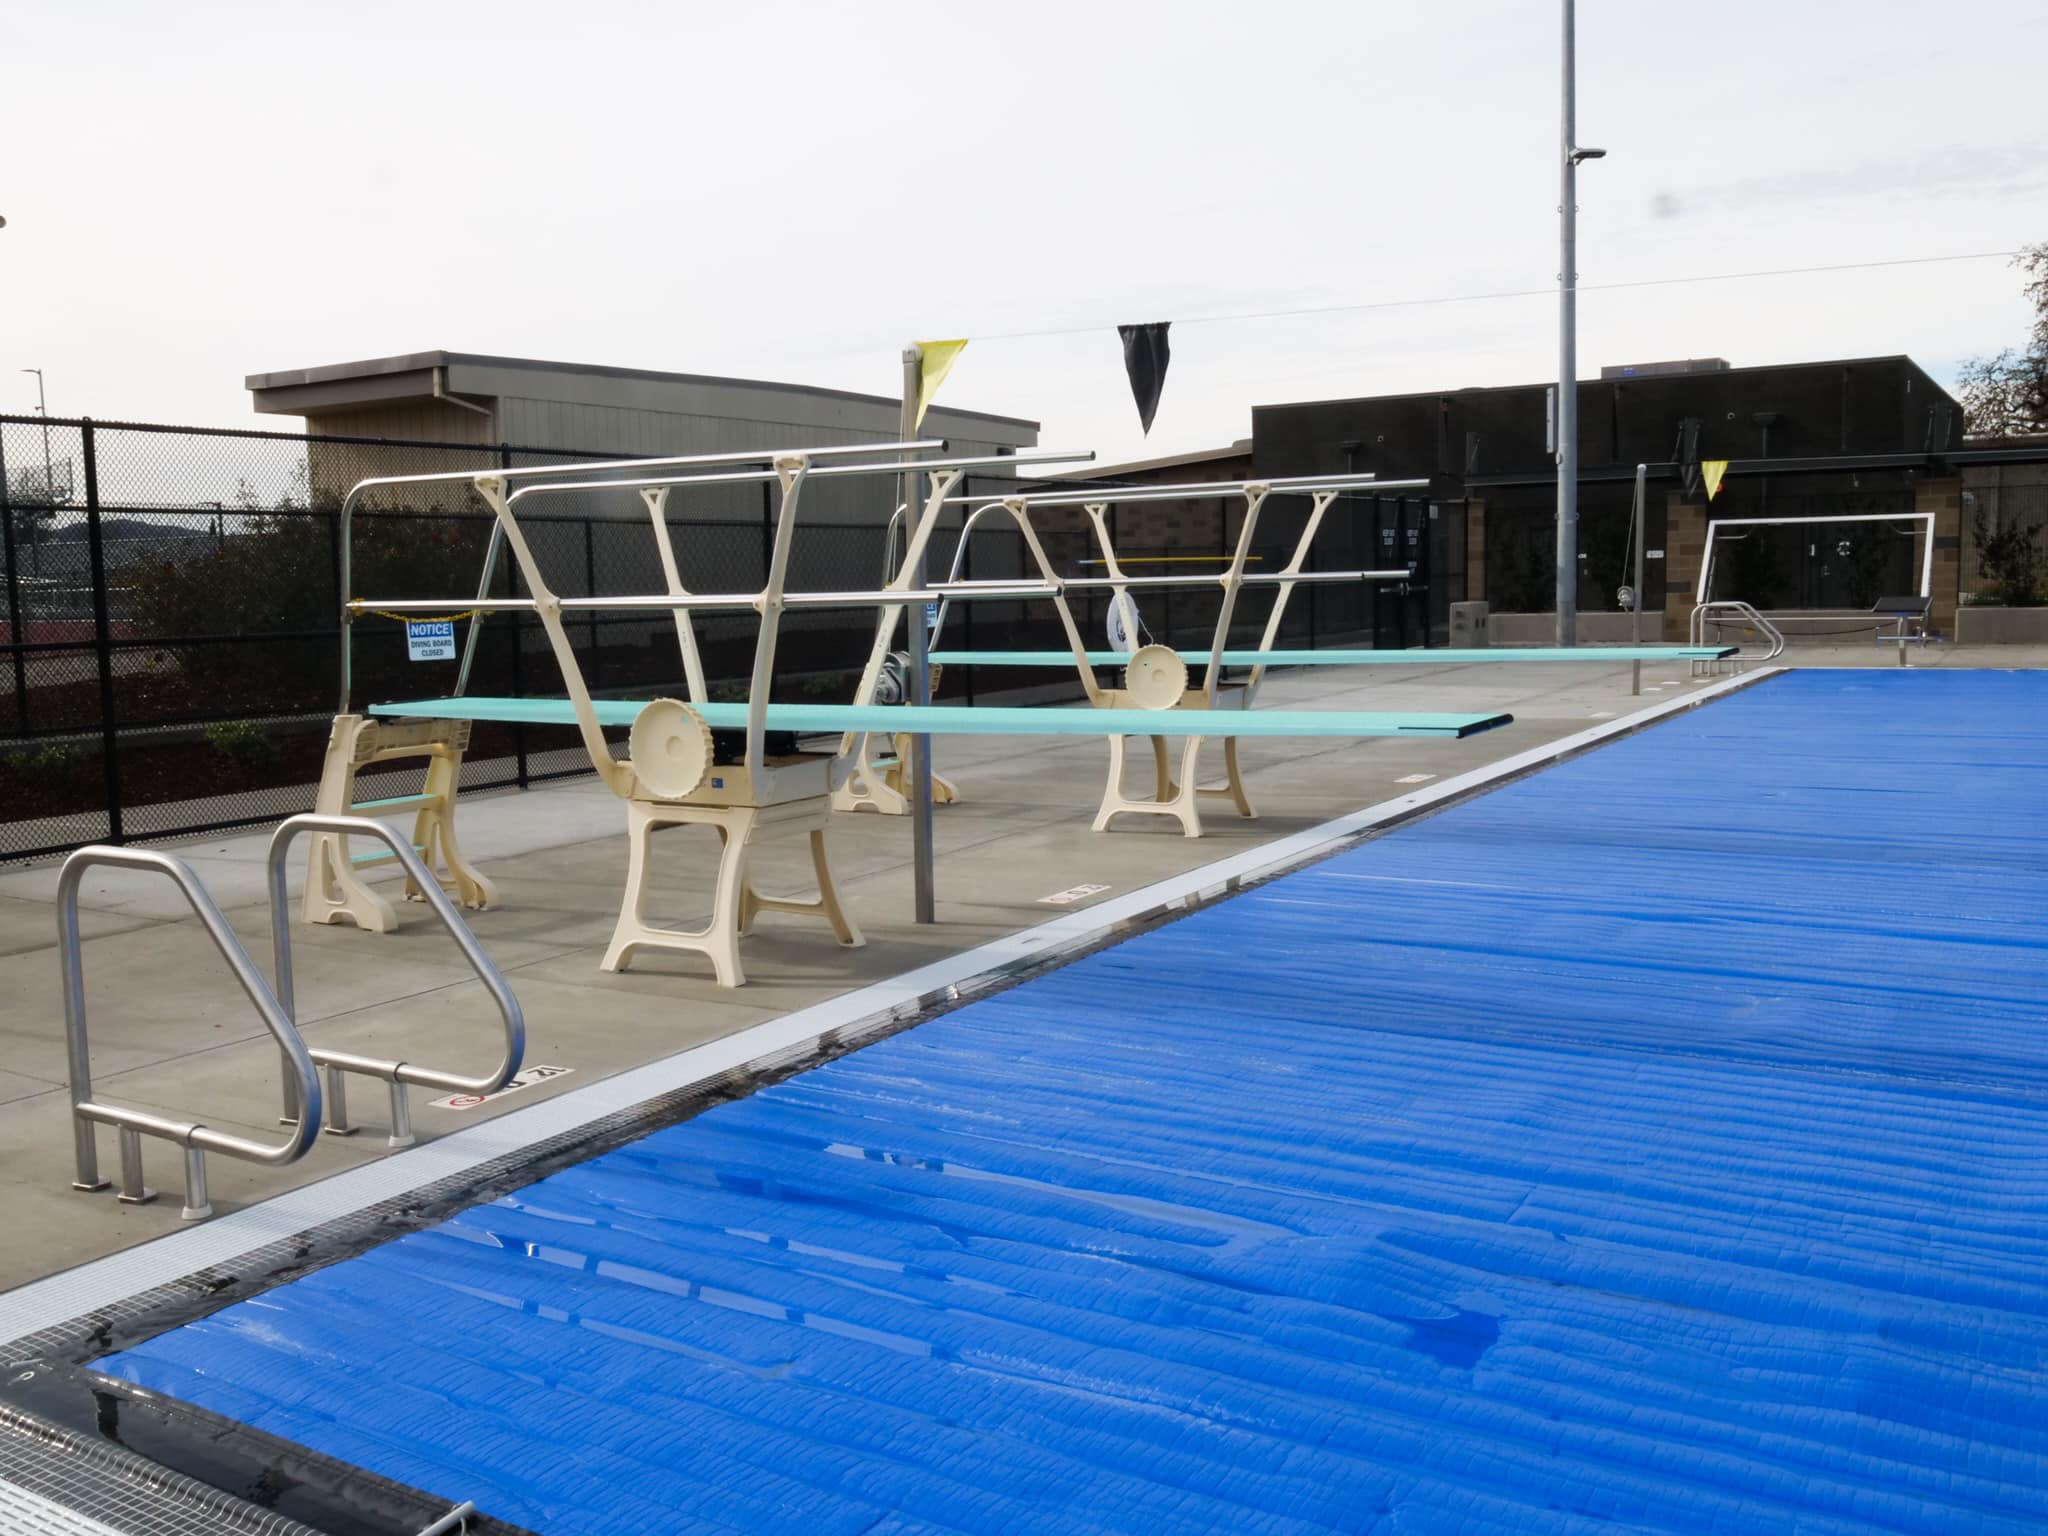 Durafirm Dive Stand with Maxiflex Diving Board at outdoor pool